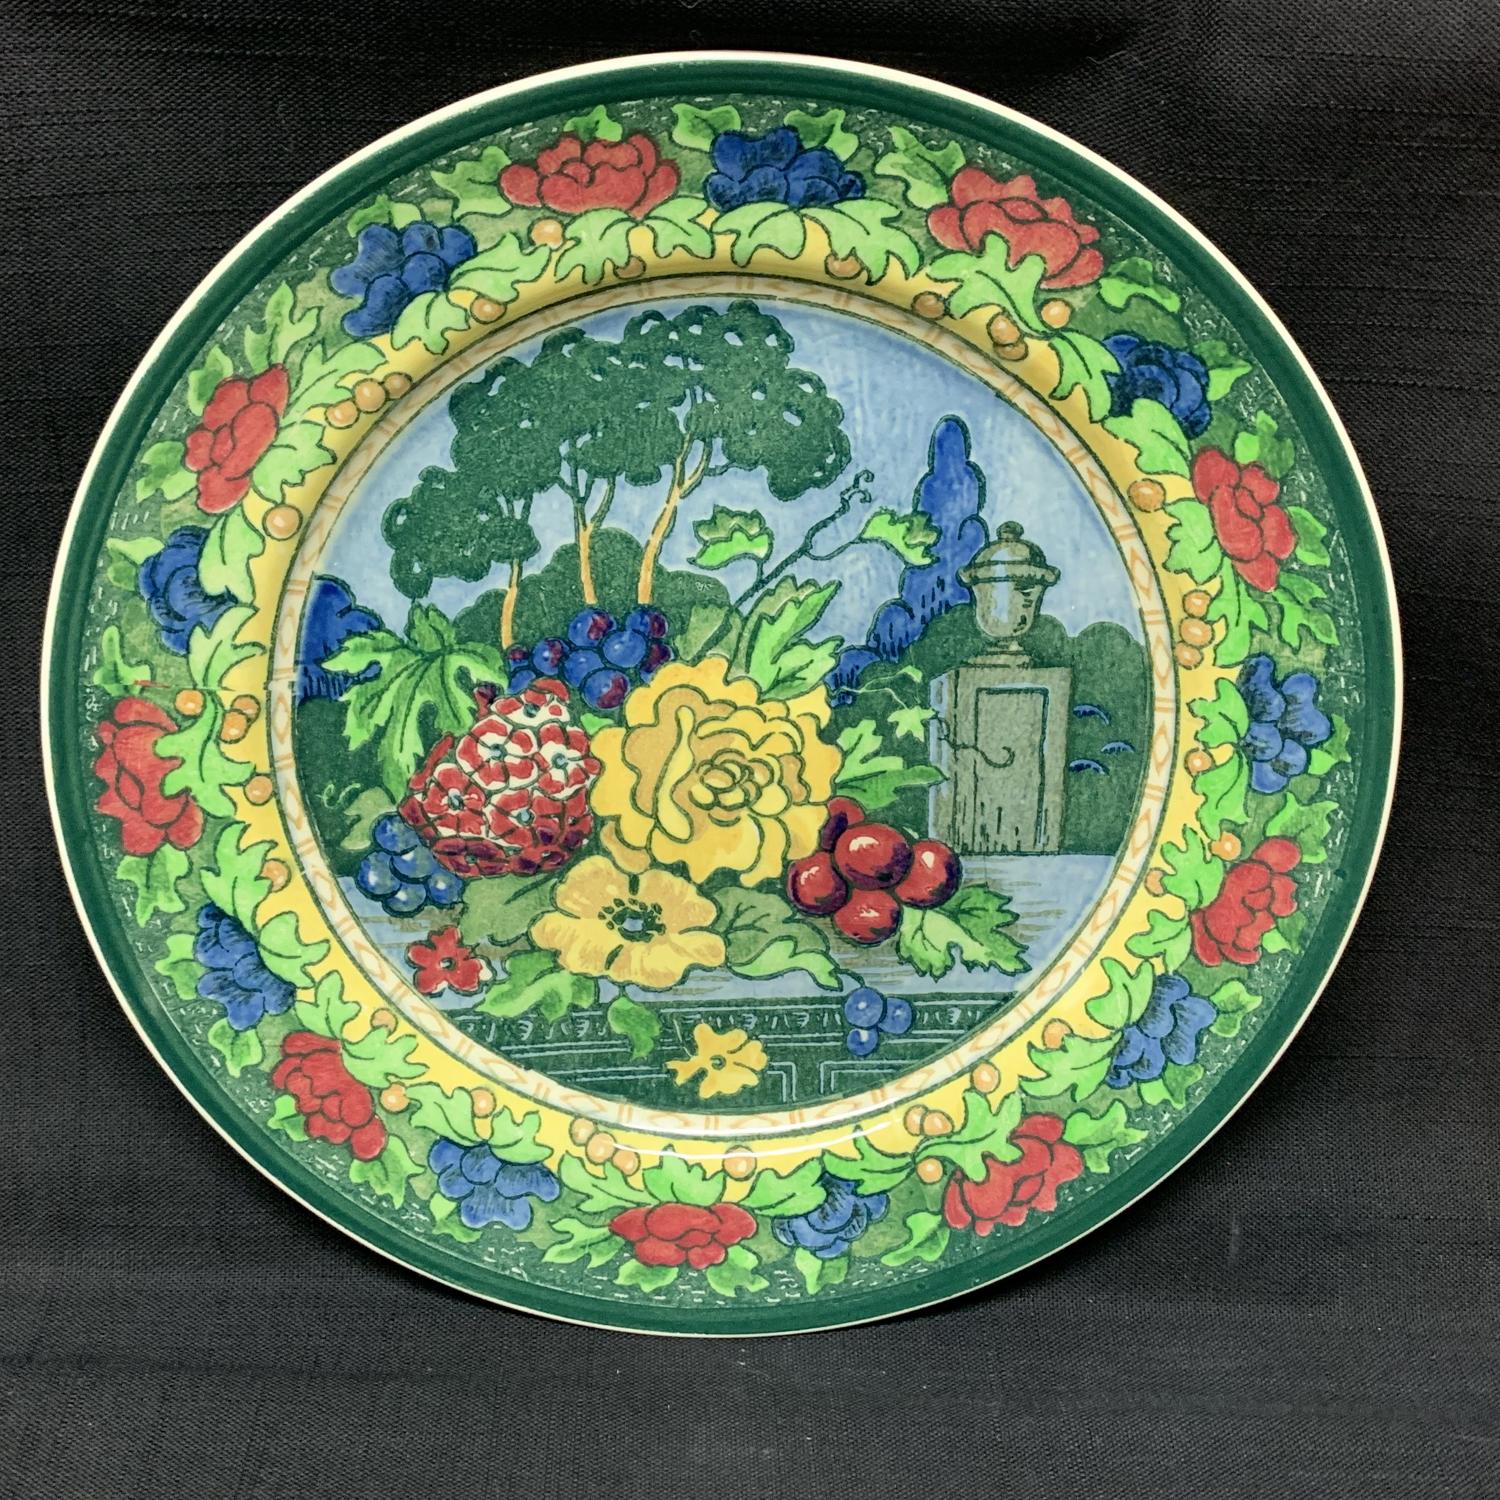 Doulton Antique English Transfer Printed Plate ~ 1920